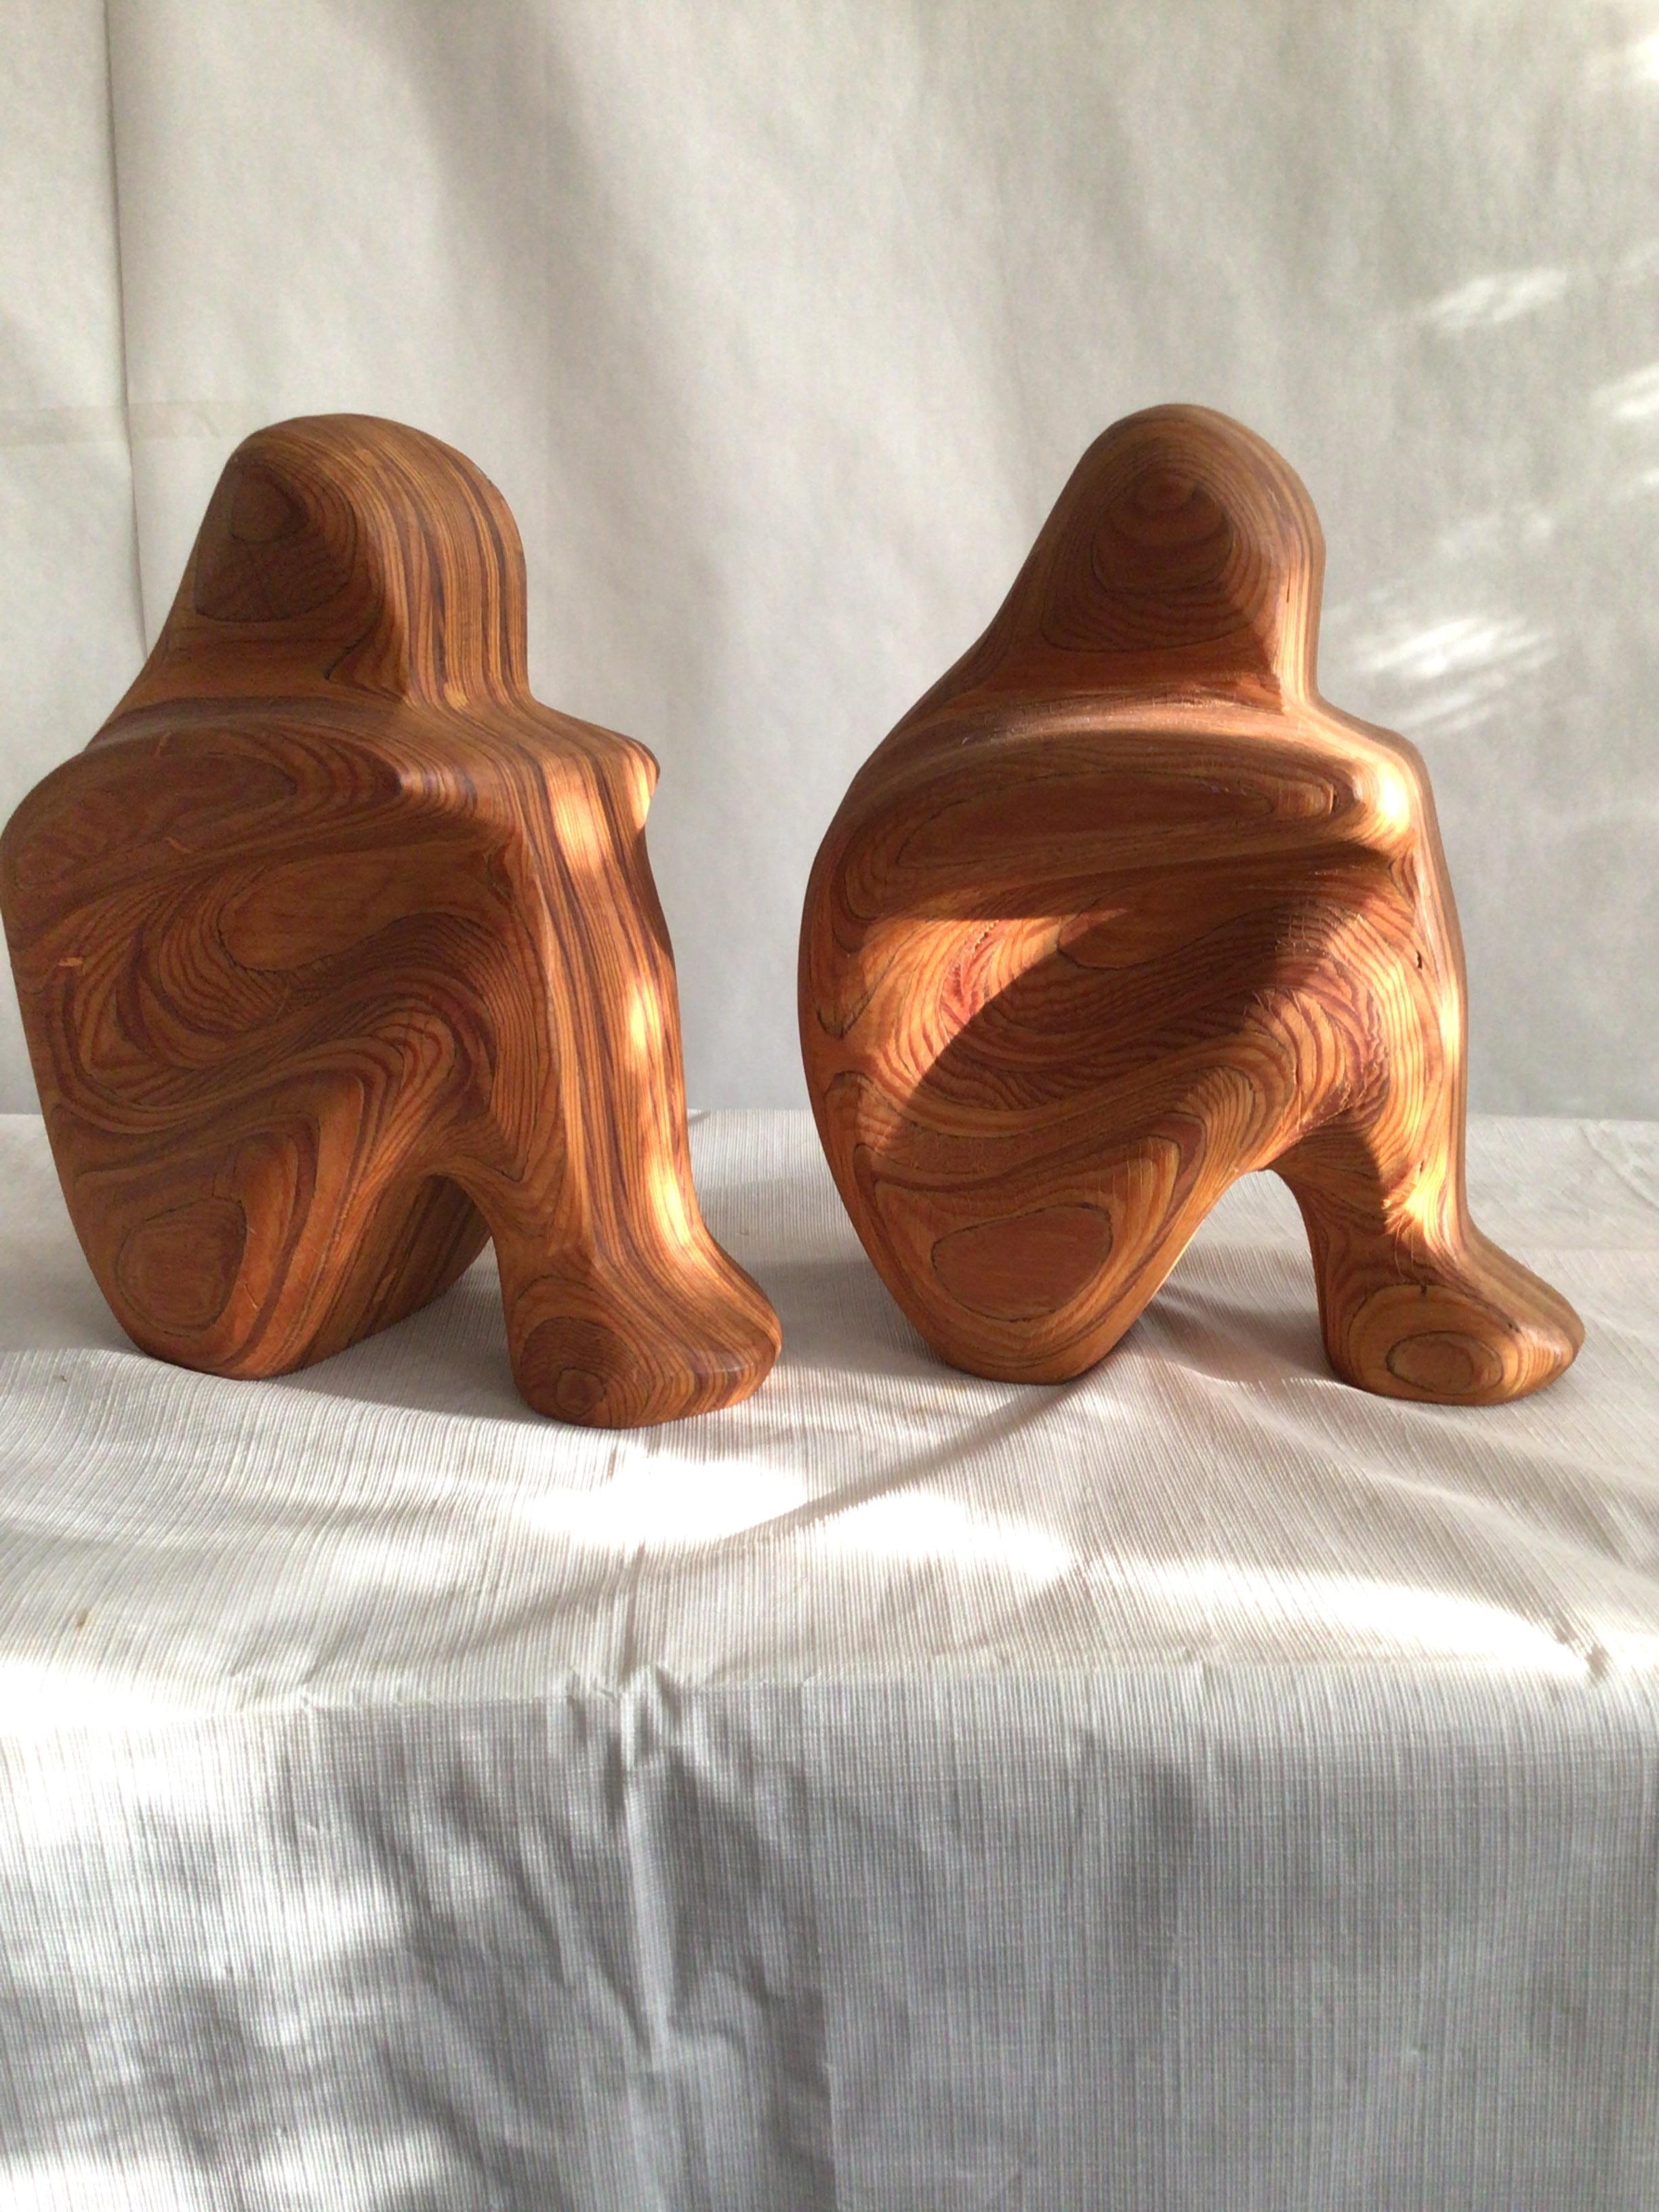 1980s Swirled Wood Sculptural Bookends In Good Condition For Sale In Tarrytown, NY